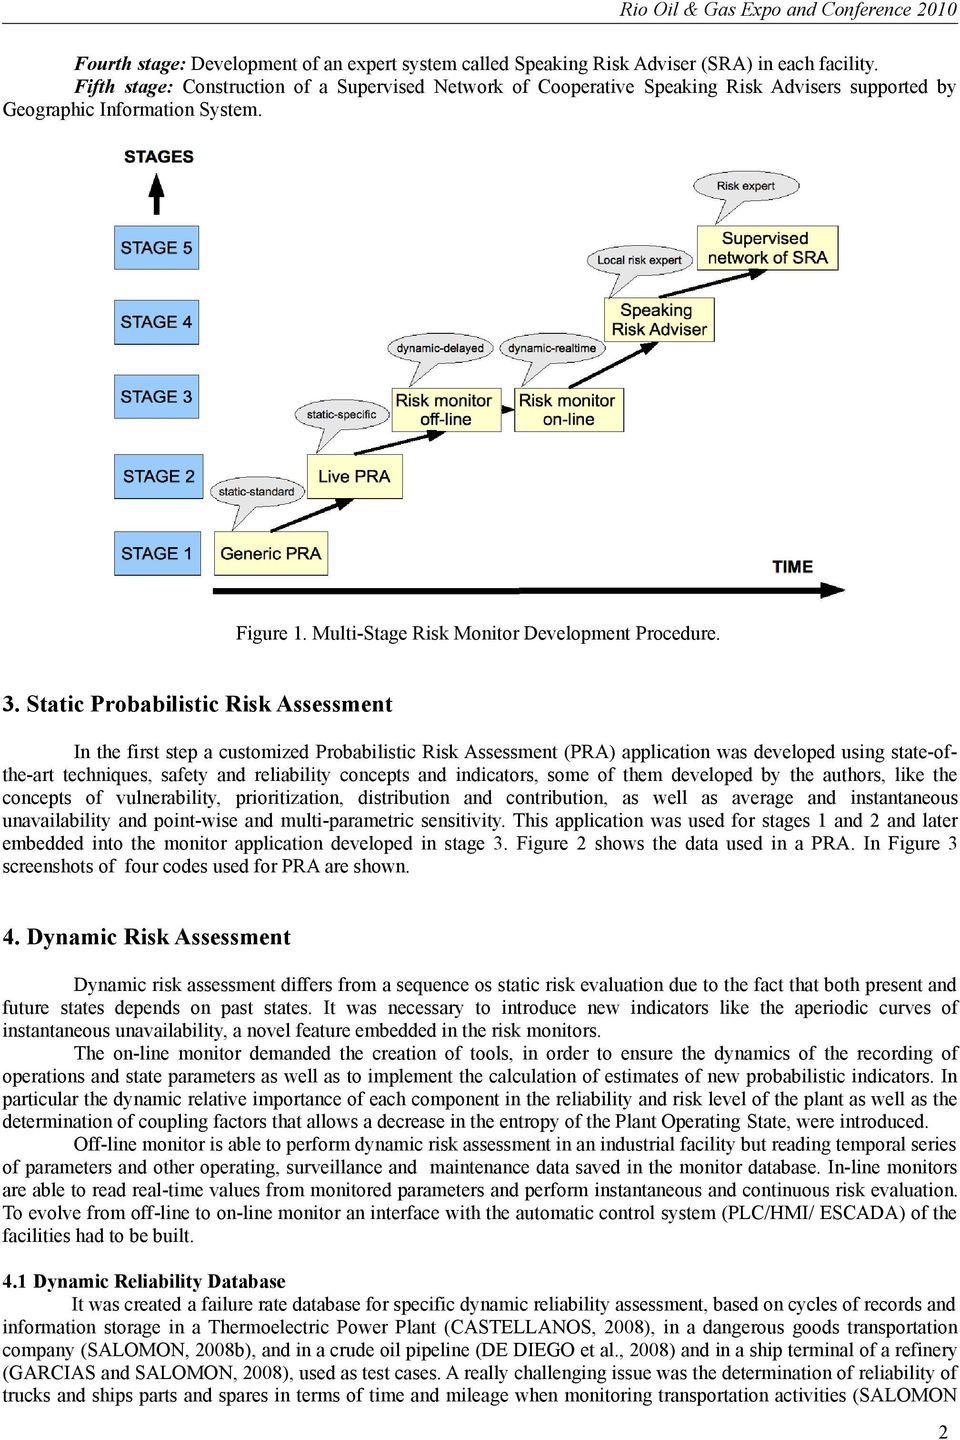 Static Probabilistic Risk Assessment In the first step a customized Probabilistic Risk Assessment (PRA) application was developed using state-ofthe-art techniques, safety and reliability concepts and